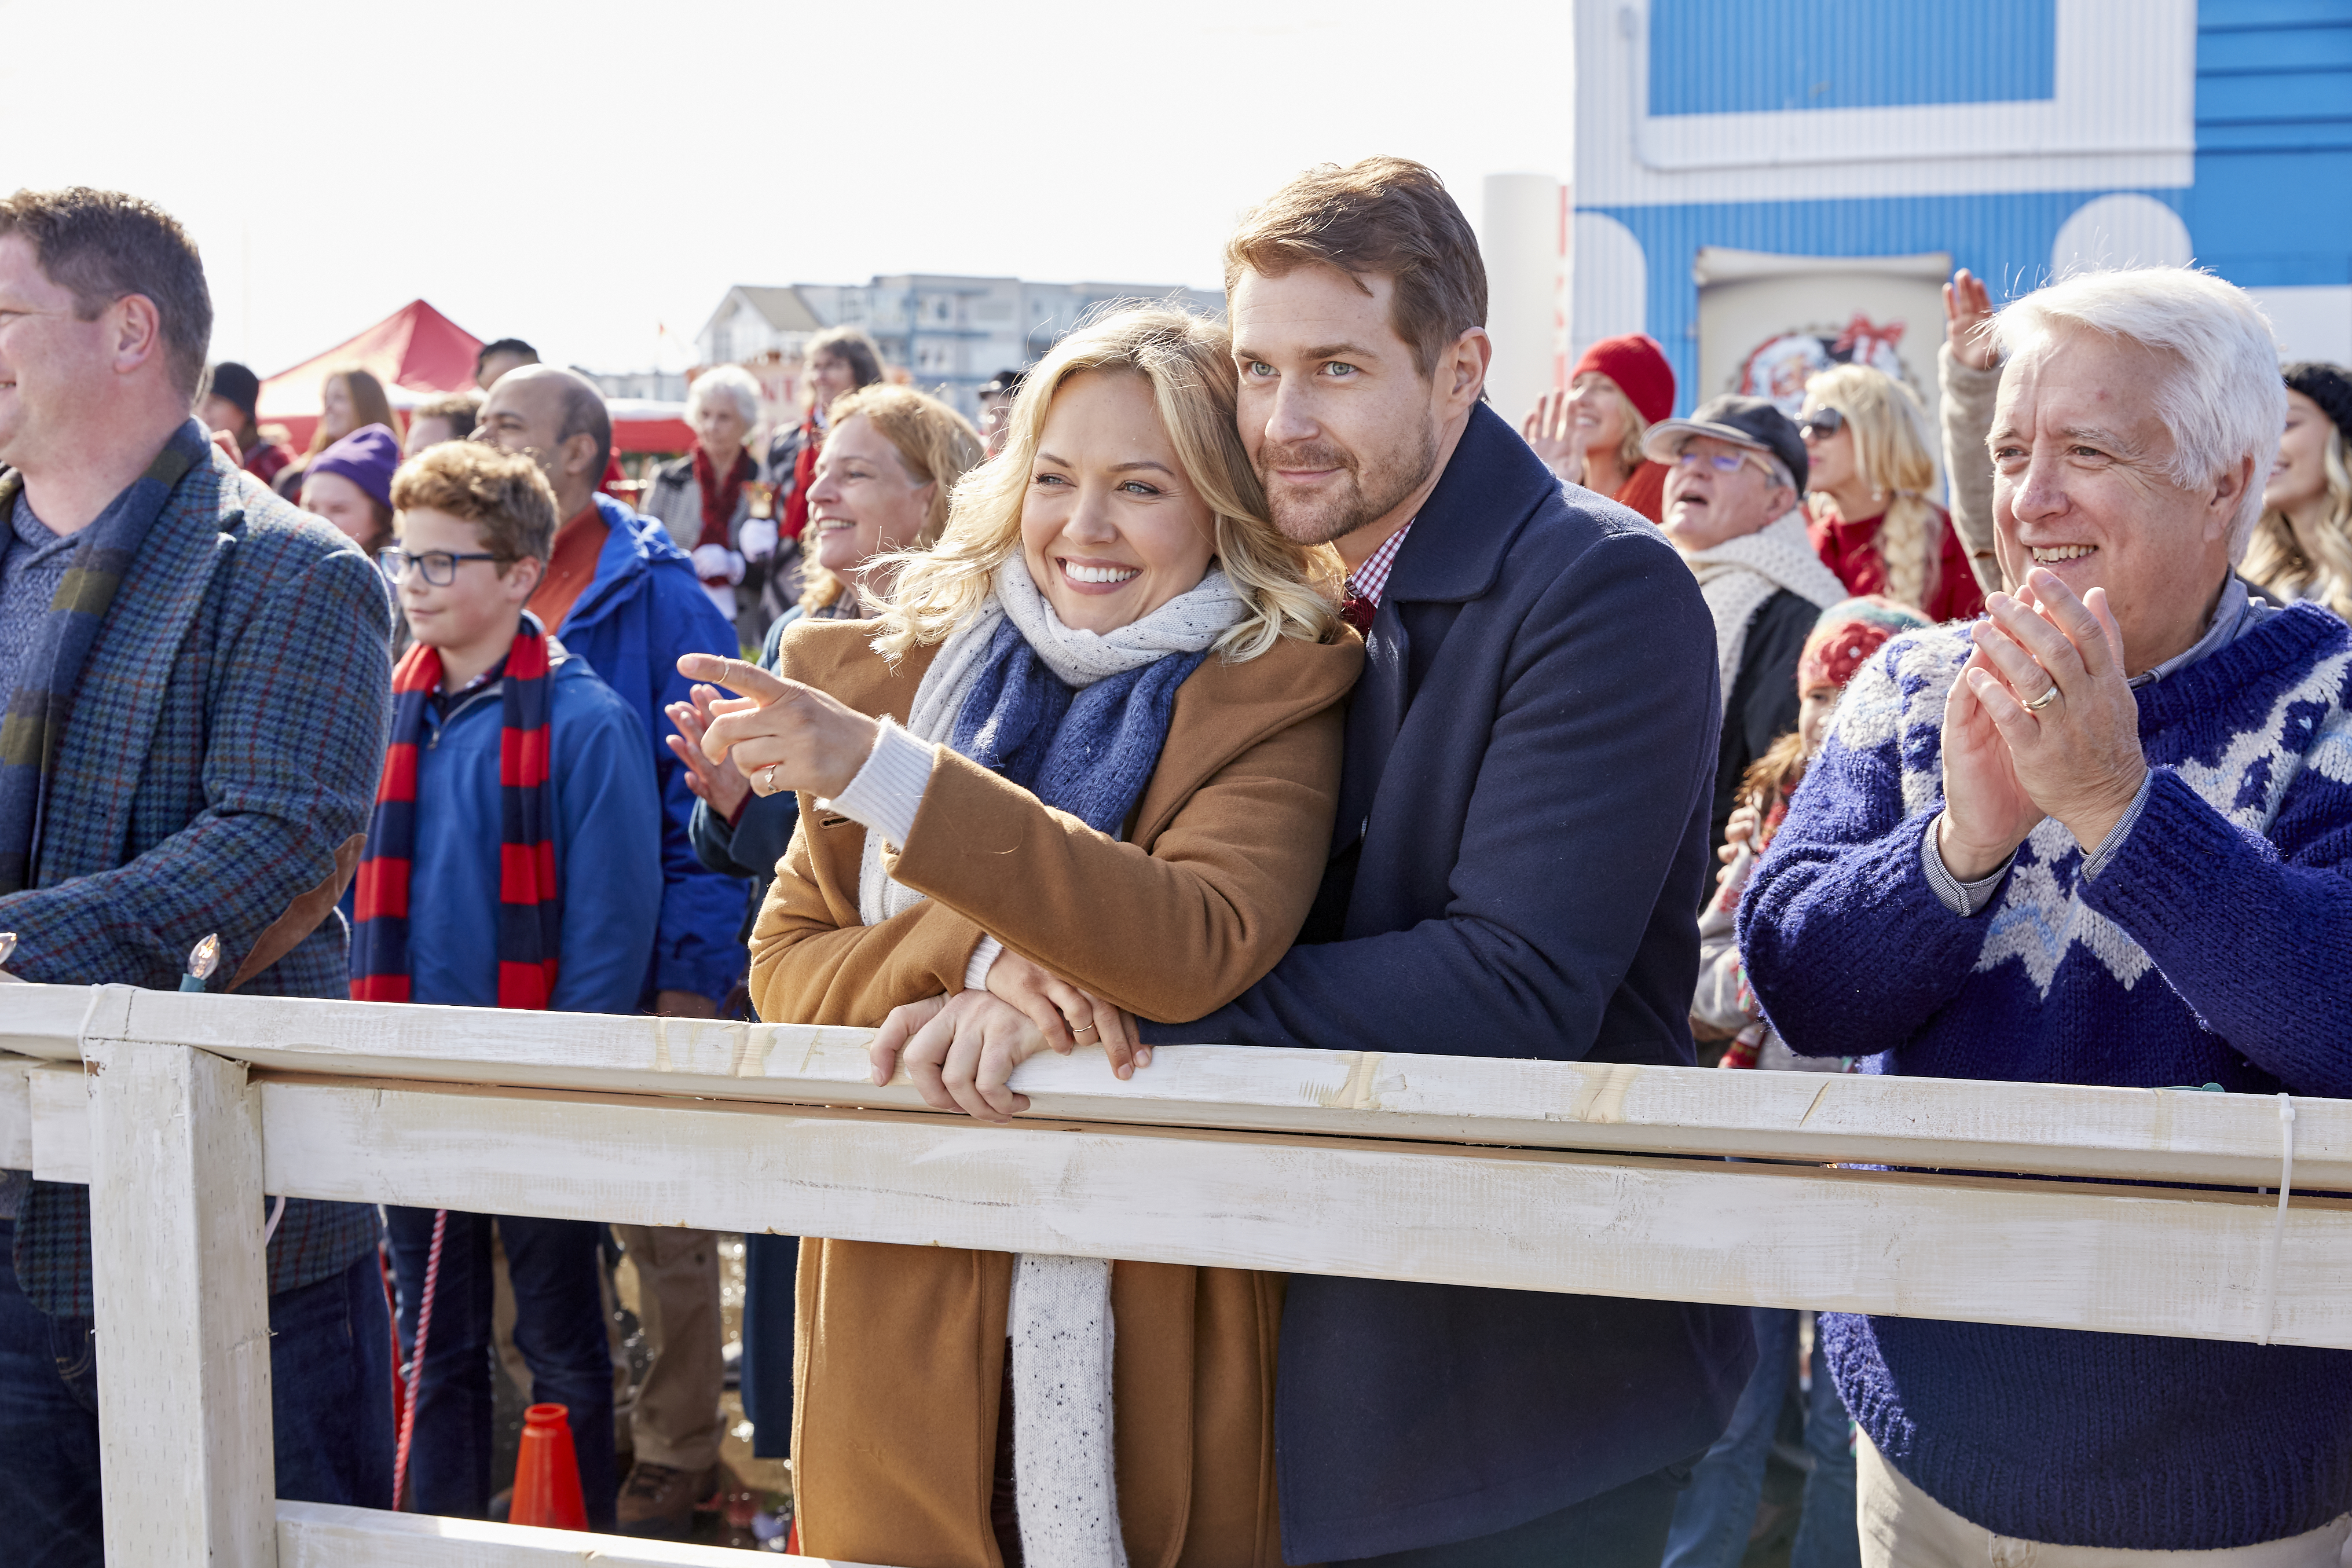 Find Out When the 2018 Hallmark Christmas Movies Will Air